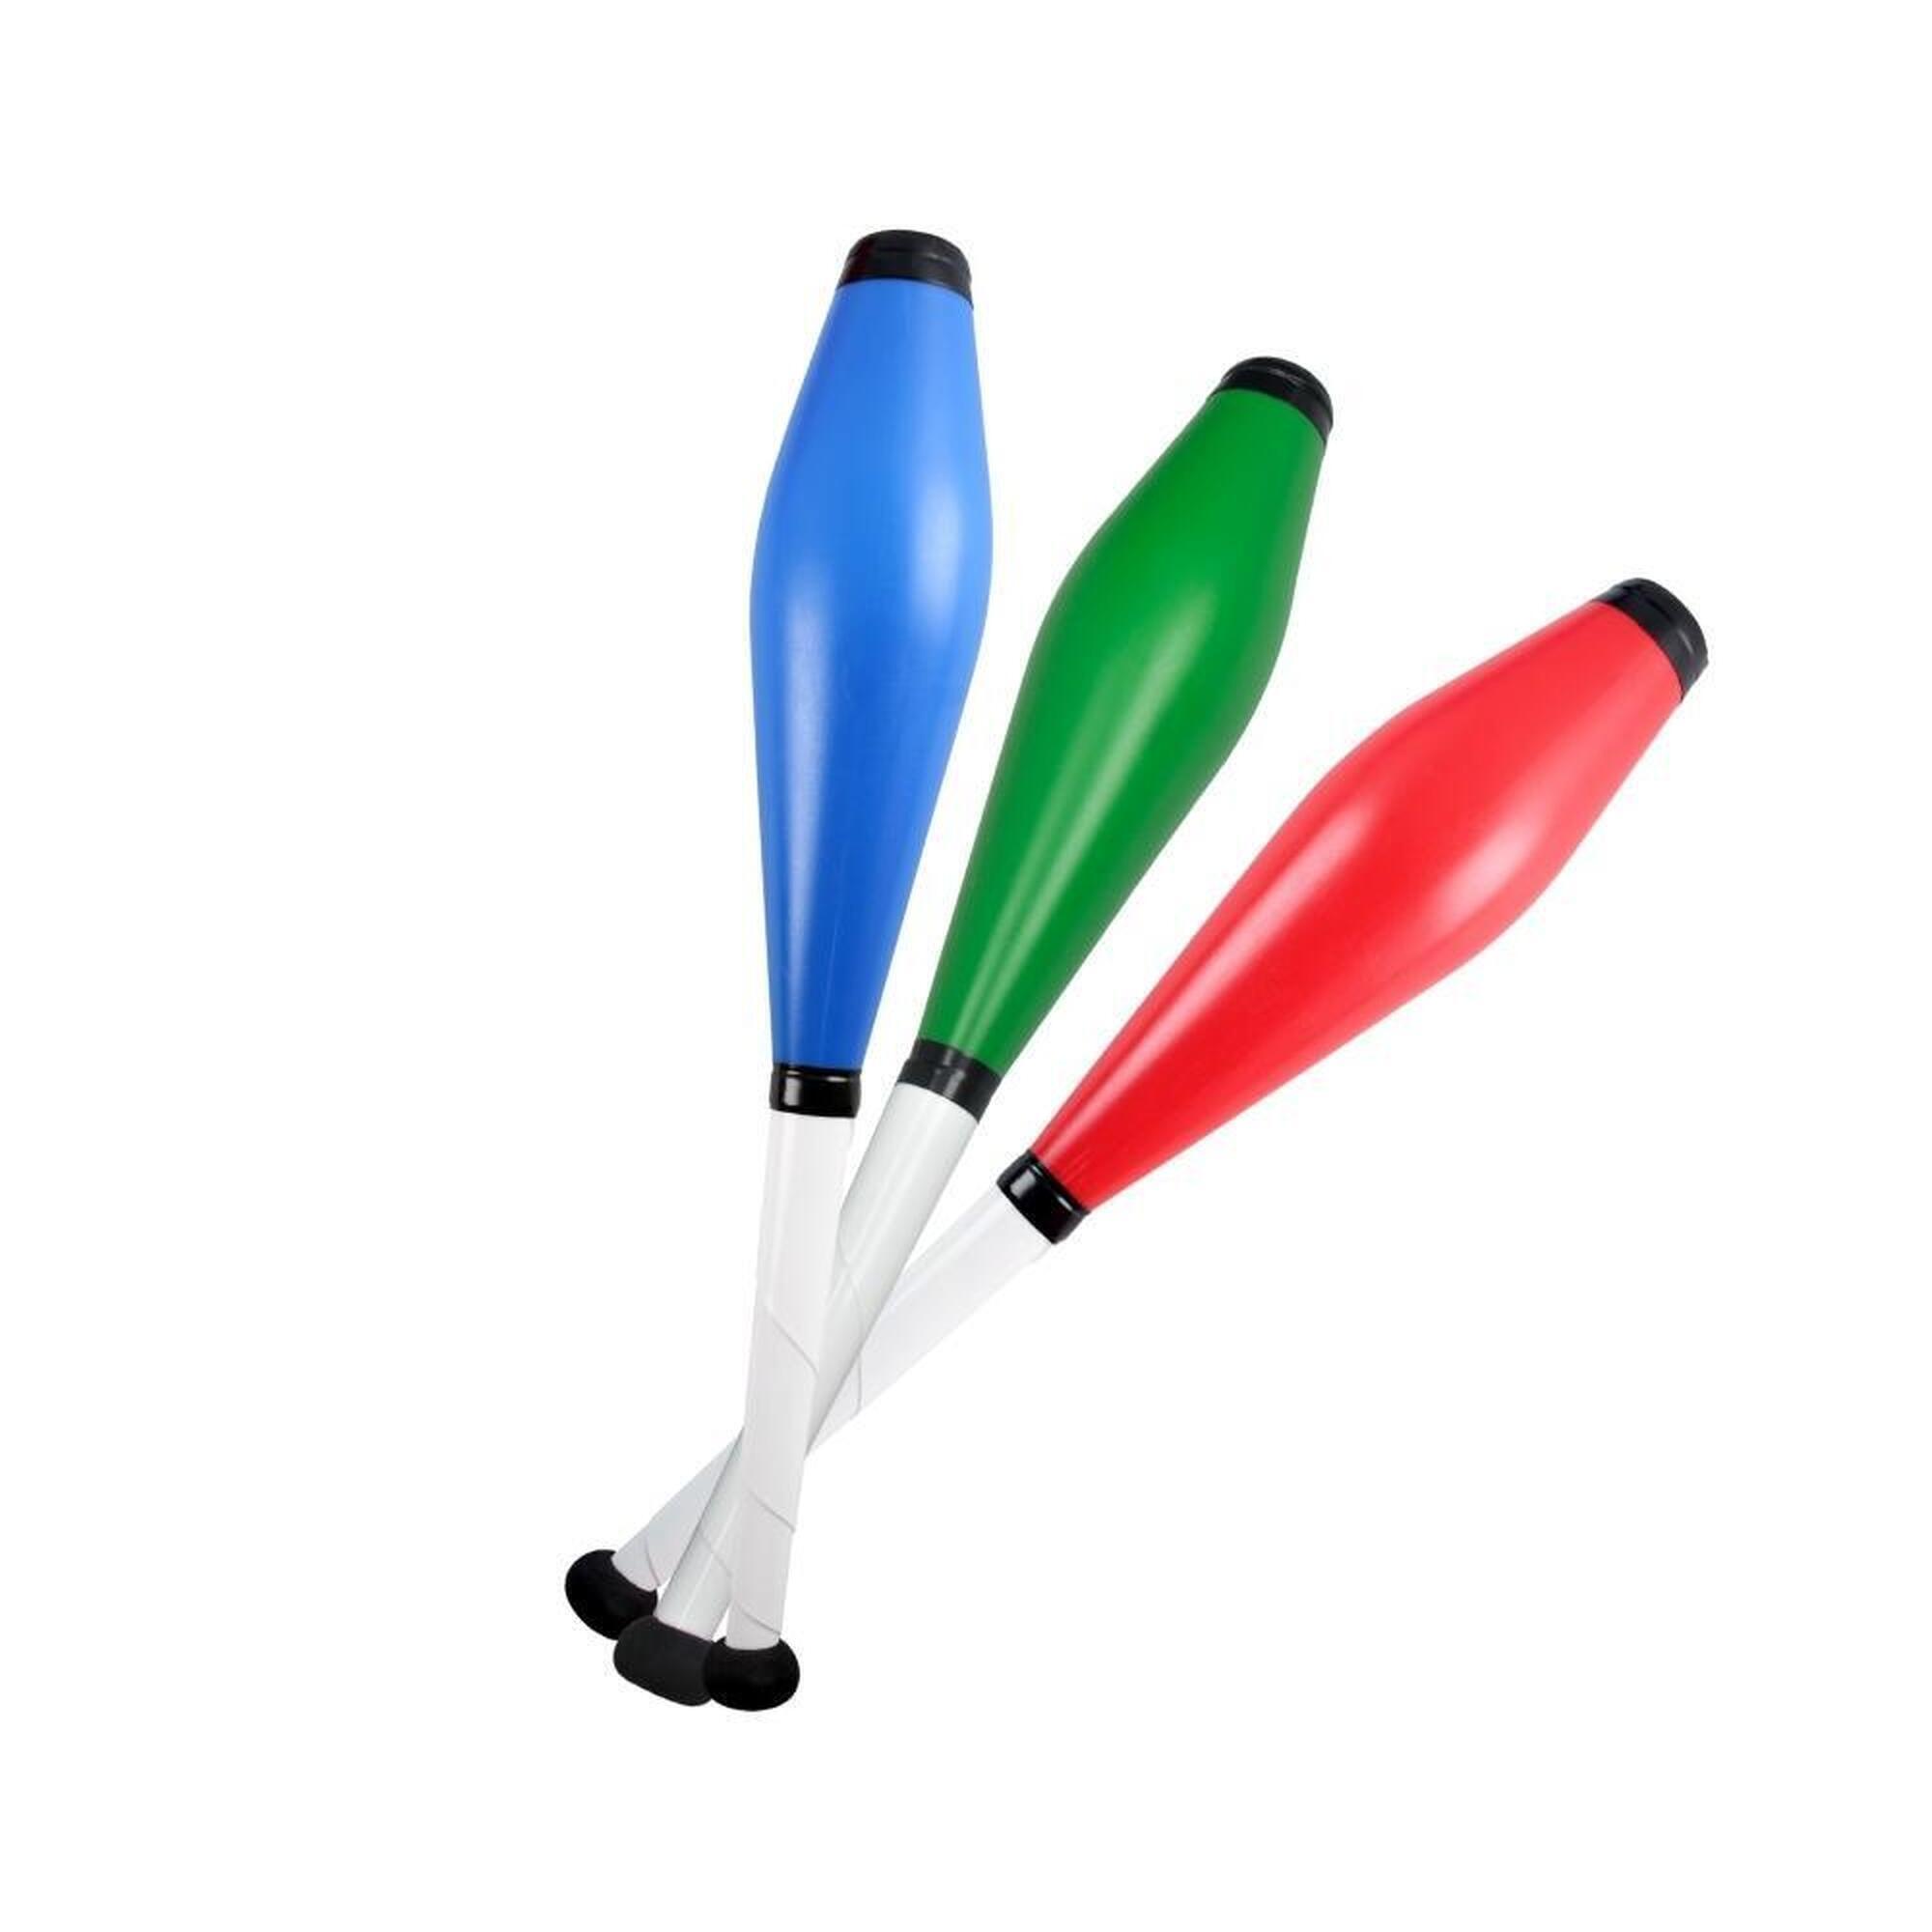 Set of 3x Trainer Juggling Club - Red, Green, Blue 1/1